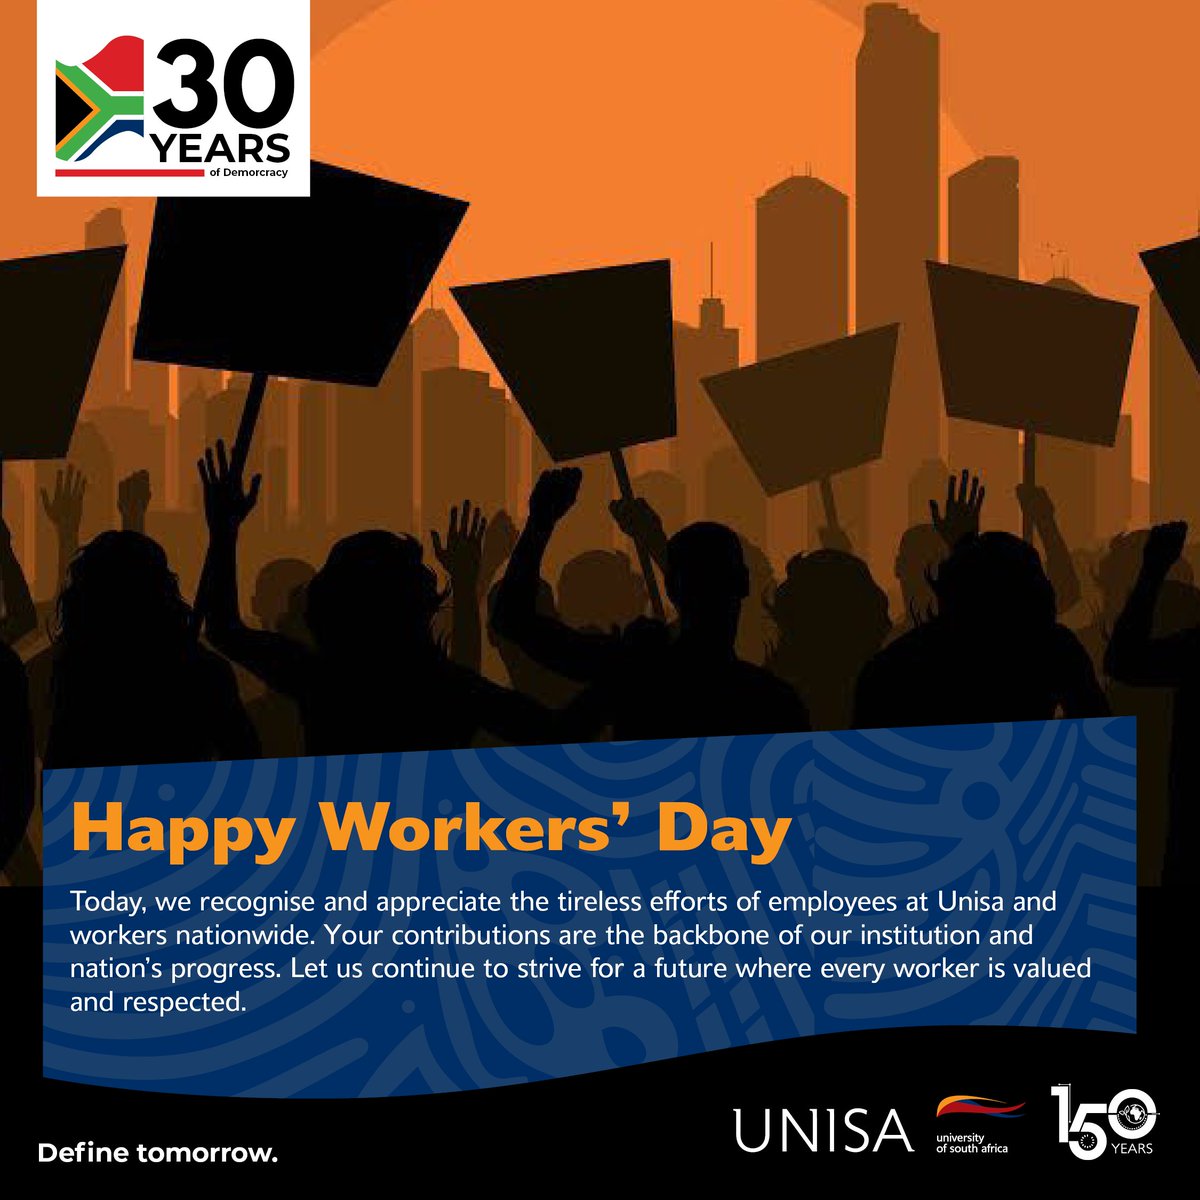 Today, we recognise and appreciate the tireless efforts of employees at Unisa and workers nationwide. Your contributions are the backbone of our institution and nation's progress. Let us continue to strive for a future where every worker is valued and respected.